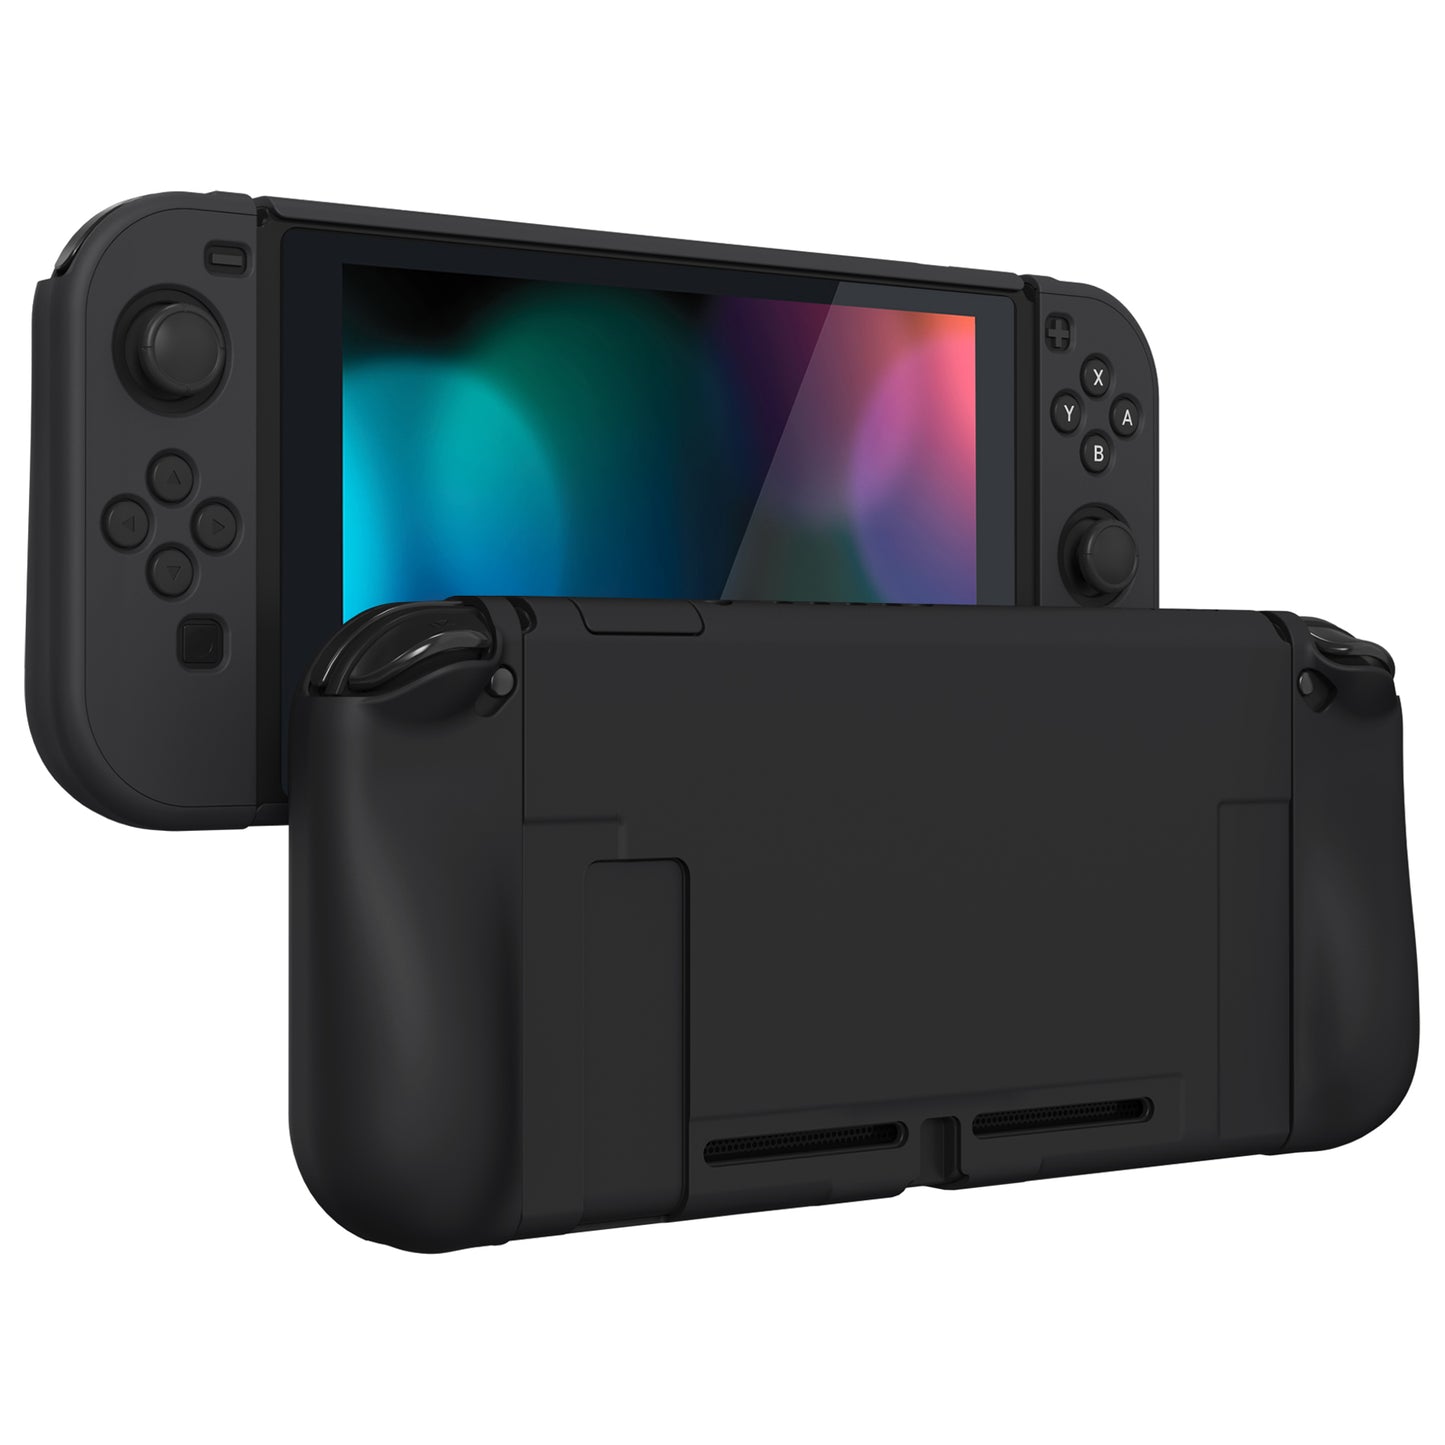 PlayVital UPGRADED Dockable Case Grip Cover for NS Switch, Ergonomic Protective Case for NS Switch, Separable Protector Hard Shell for Joycon - Black - ANSP3006 PlayVital